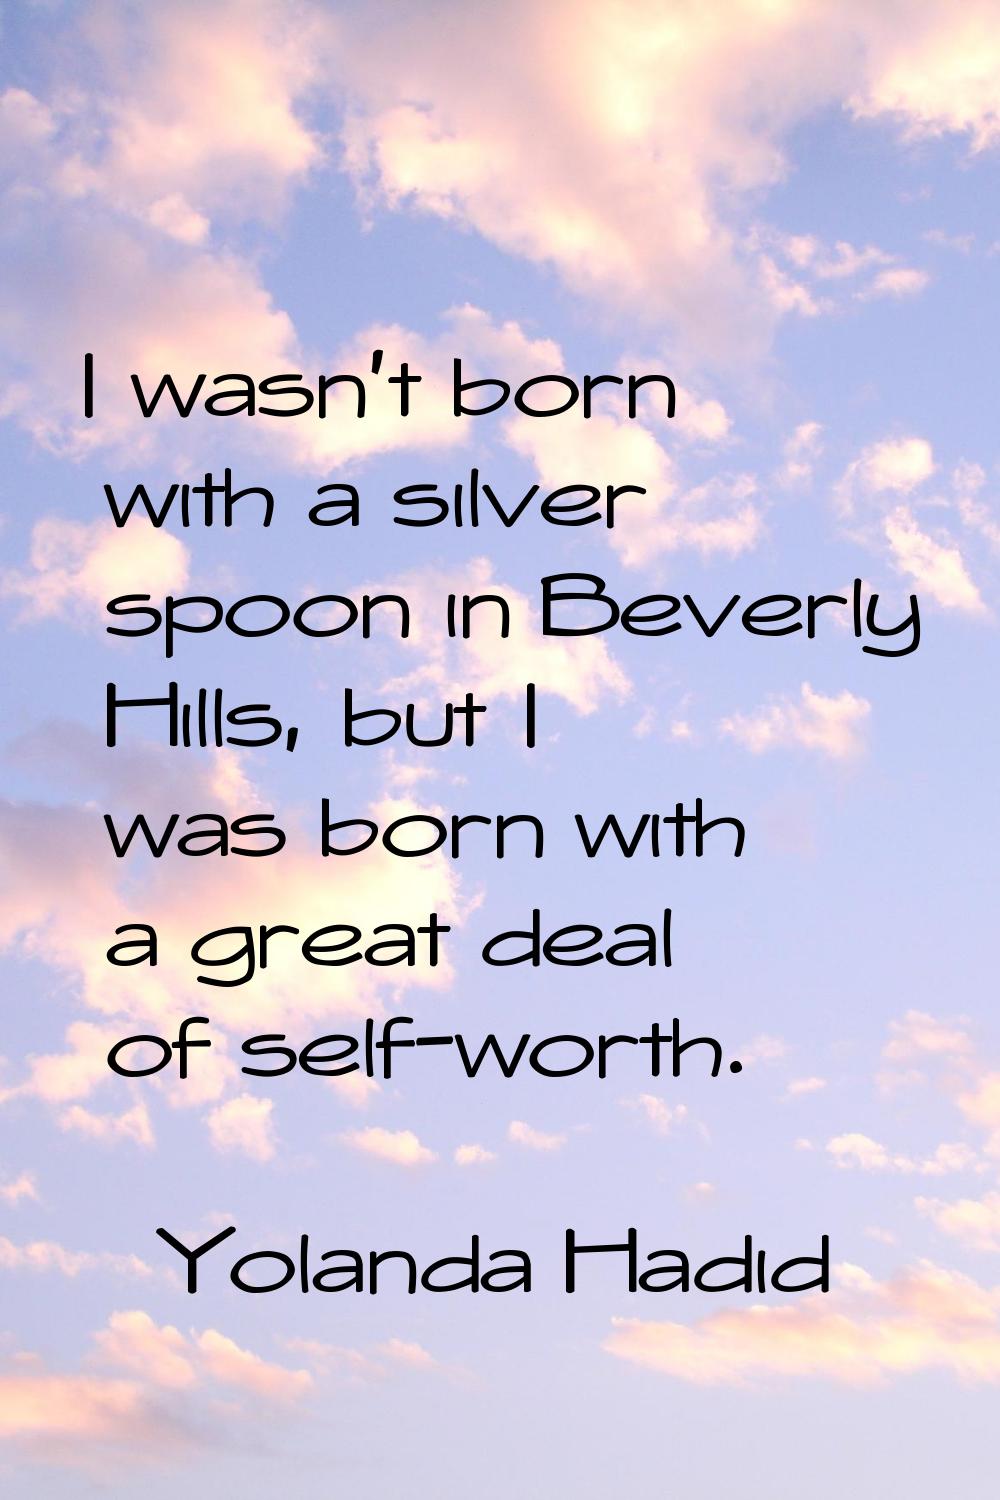 I wasn't born with a silver spoon in Beverly Hills, but I was born with a great deal of self-worth.